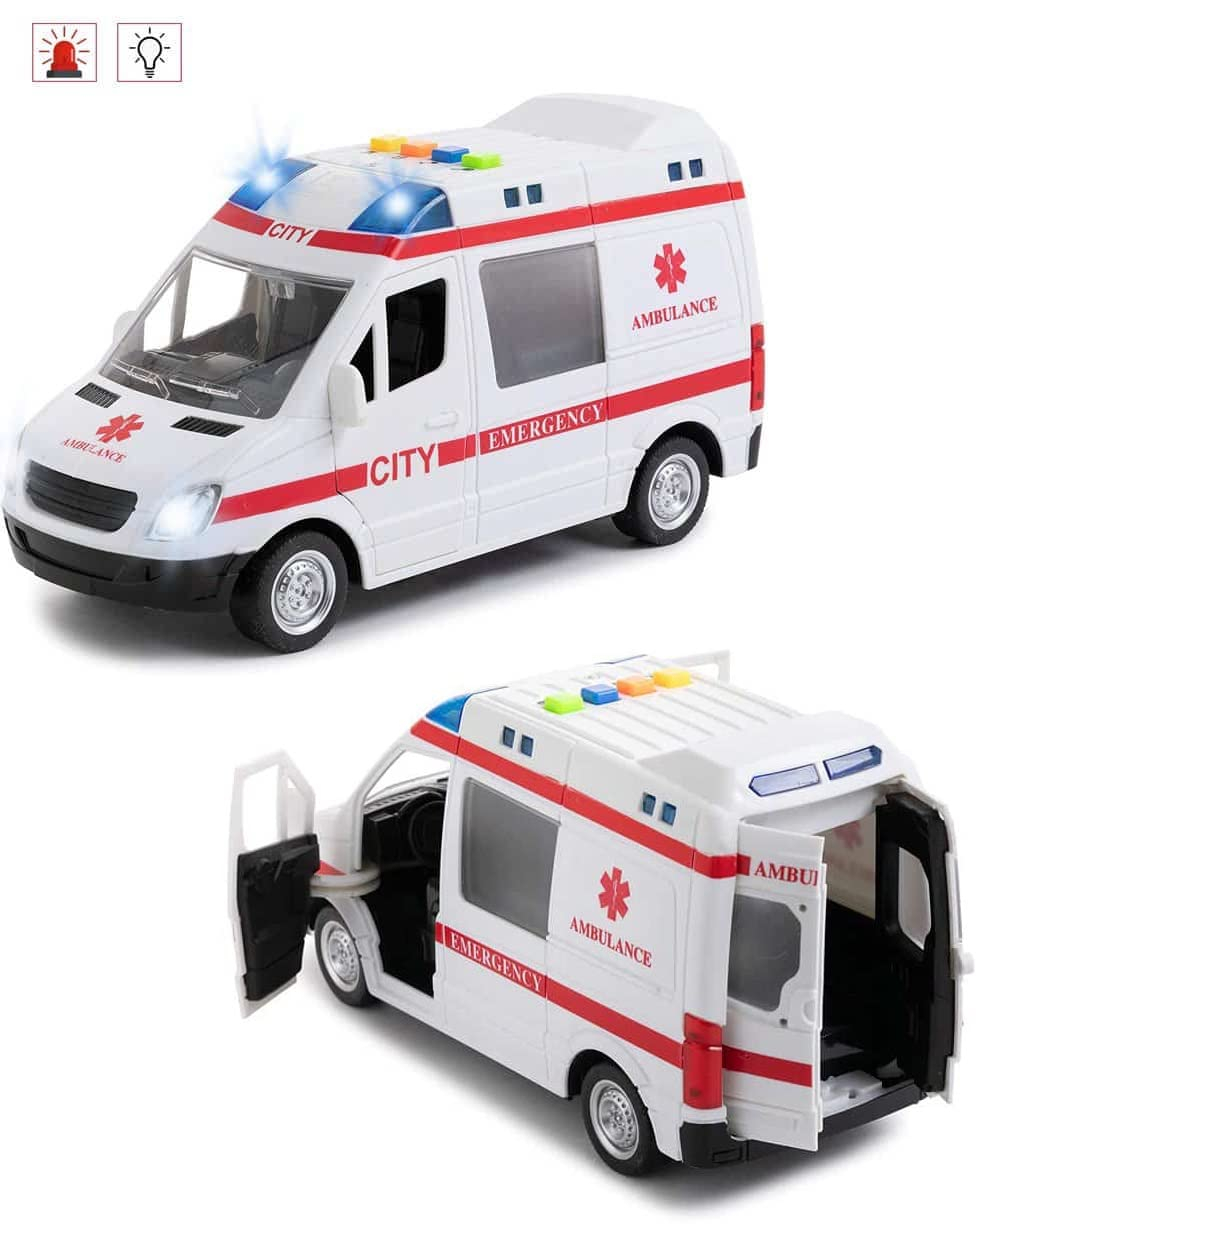 Ambulance Toy For Kids With Light & Siren Sound Effects – Pull